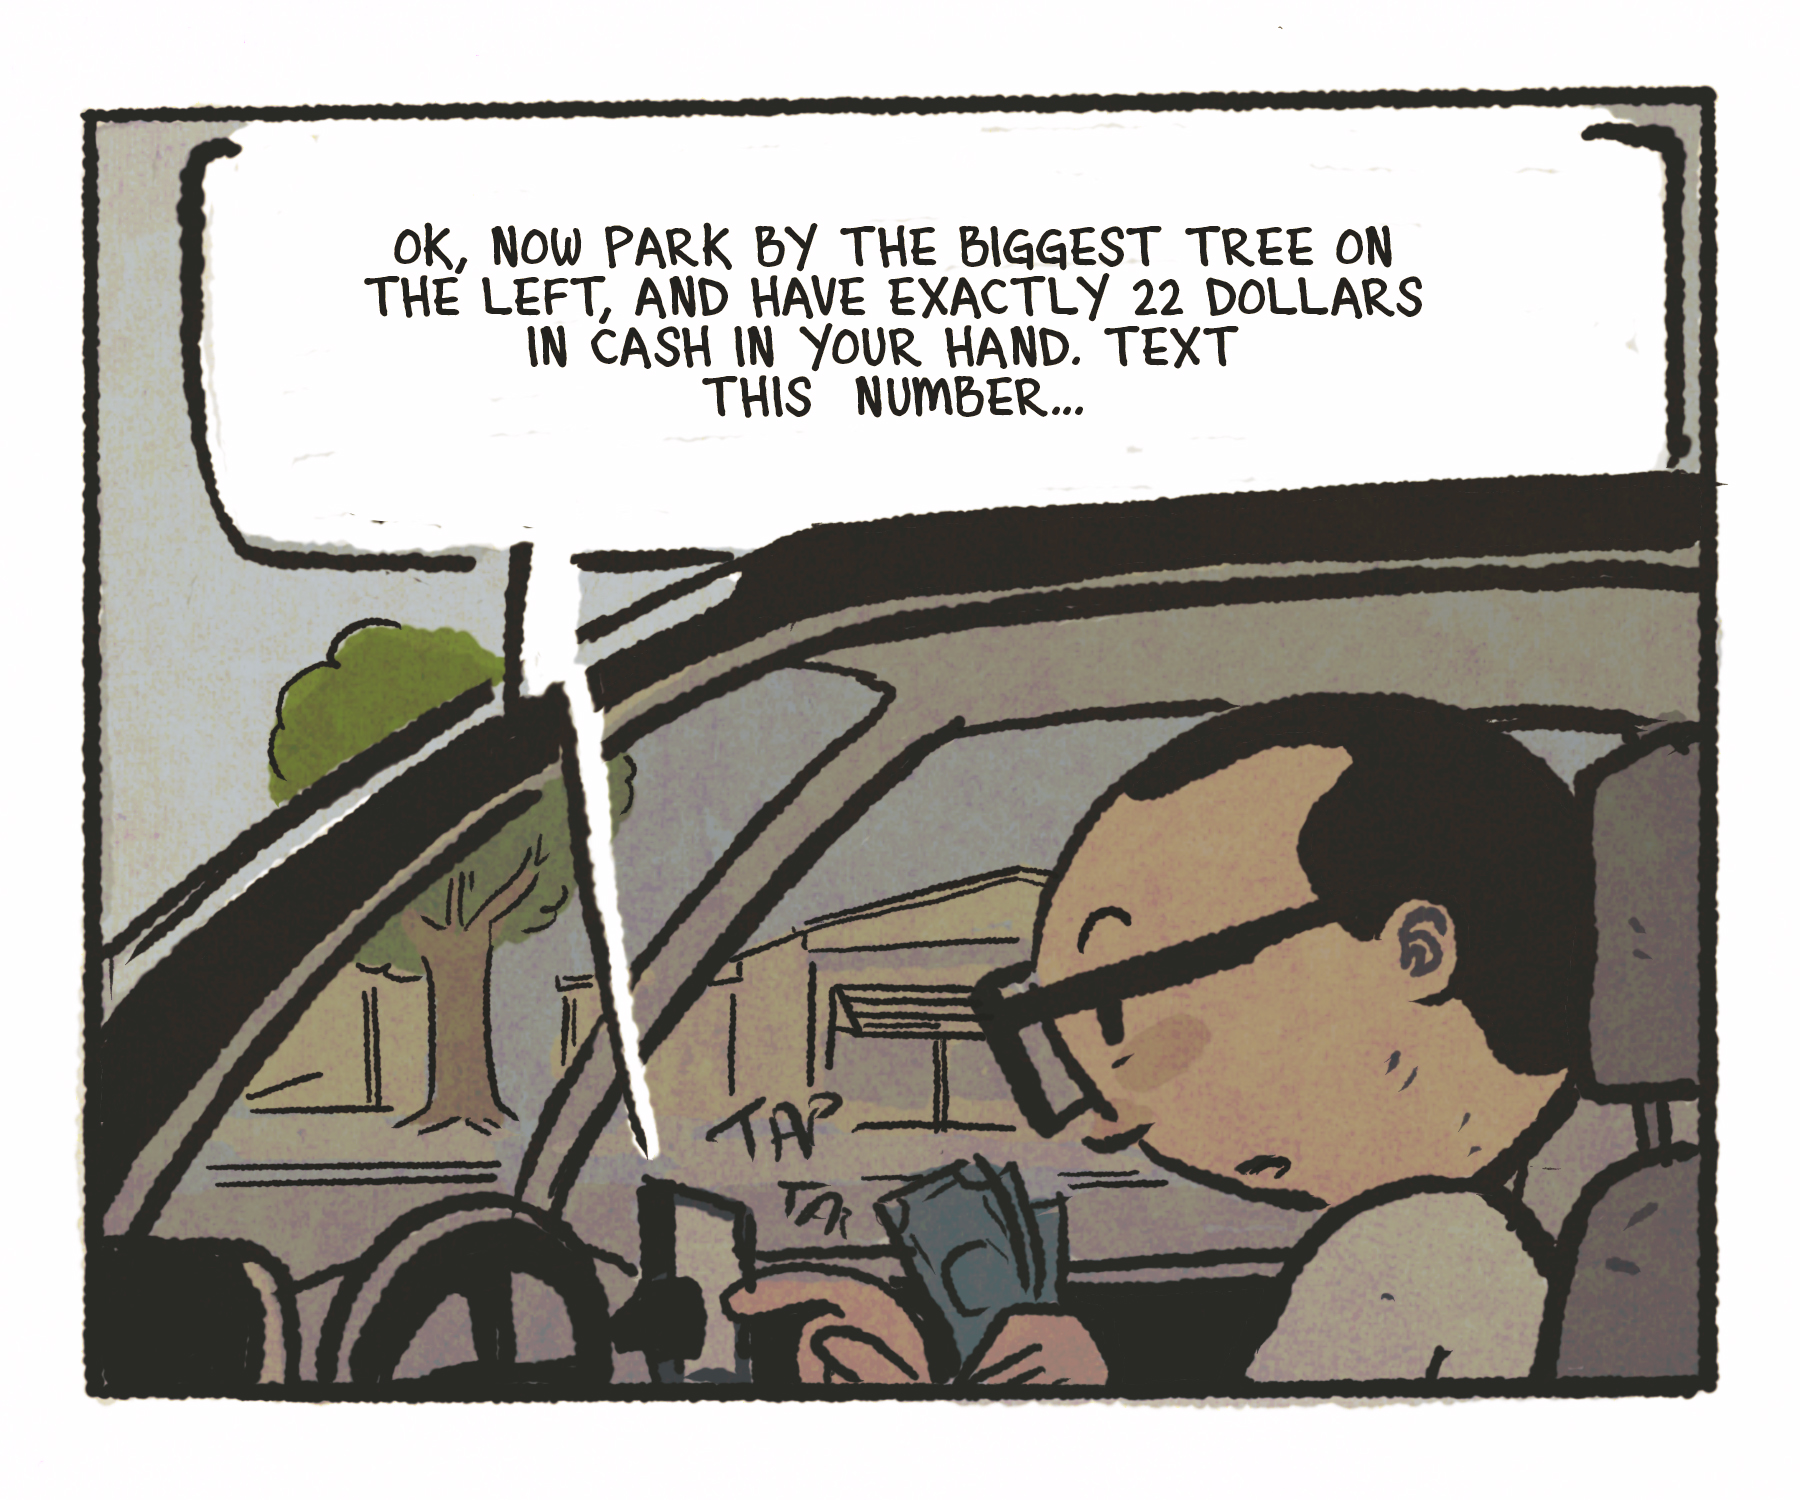 Comics panel: The man is sitting in his parked car, tapping on his cellphone. Speech bubble: "Ok, now park by the biggest tree on the left and have exactly 22 dollars in cash in your hand. Text this number..."